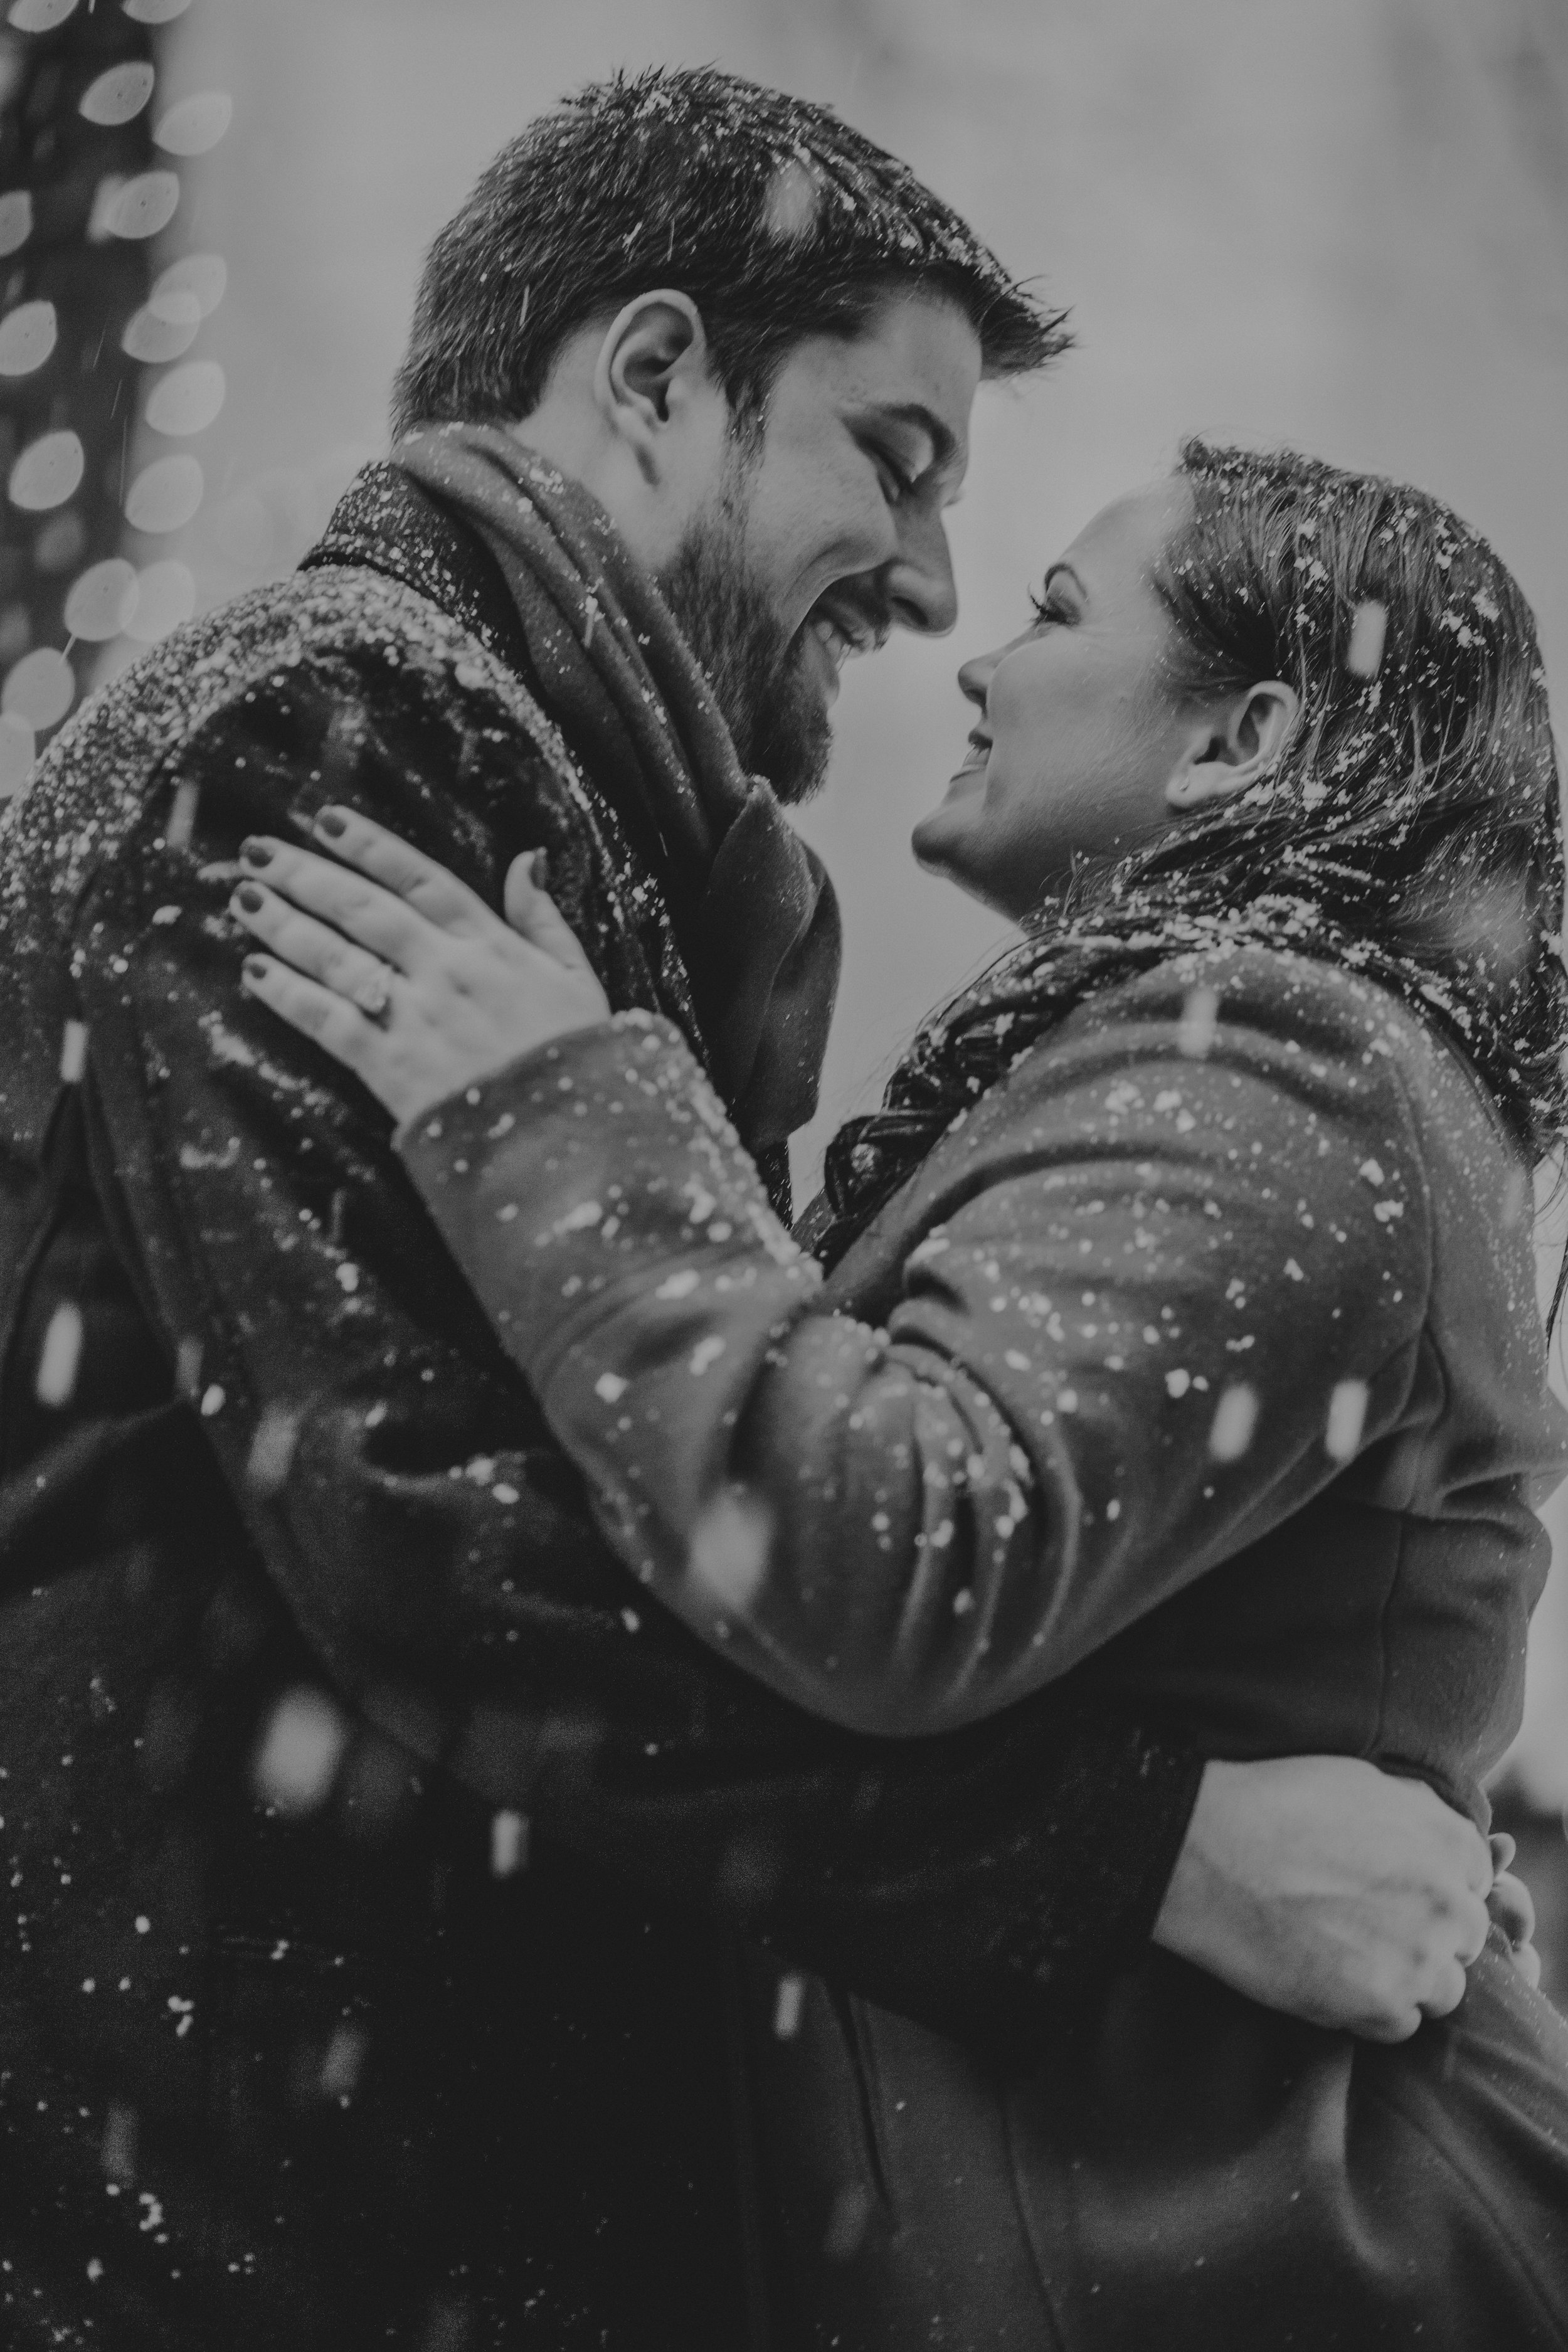 Sometimes snow can make it more romantic with engagement sessions.